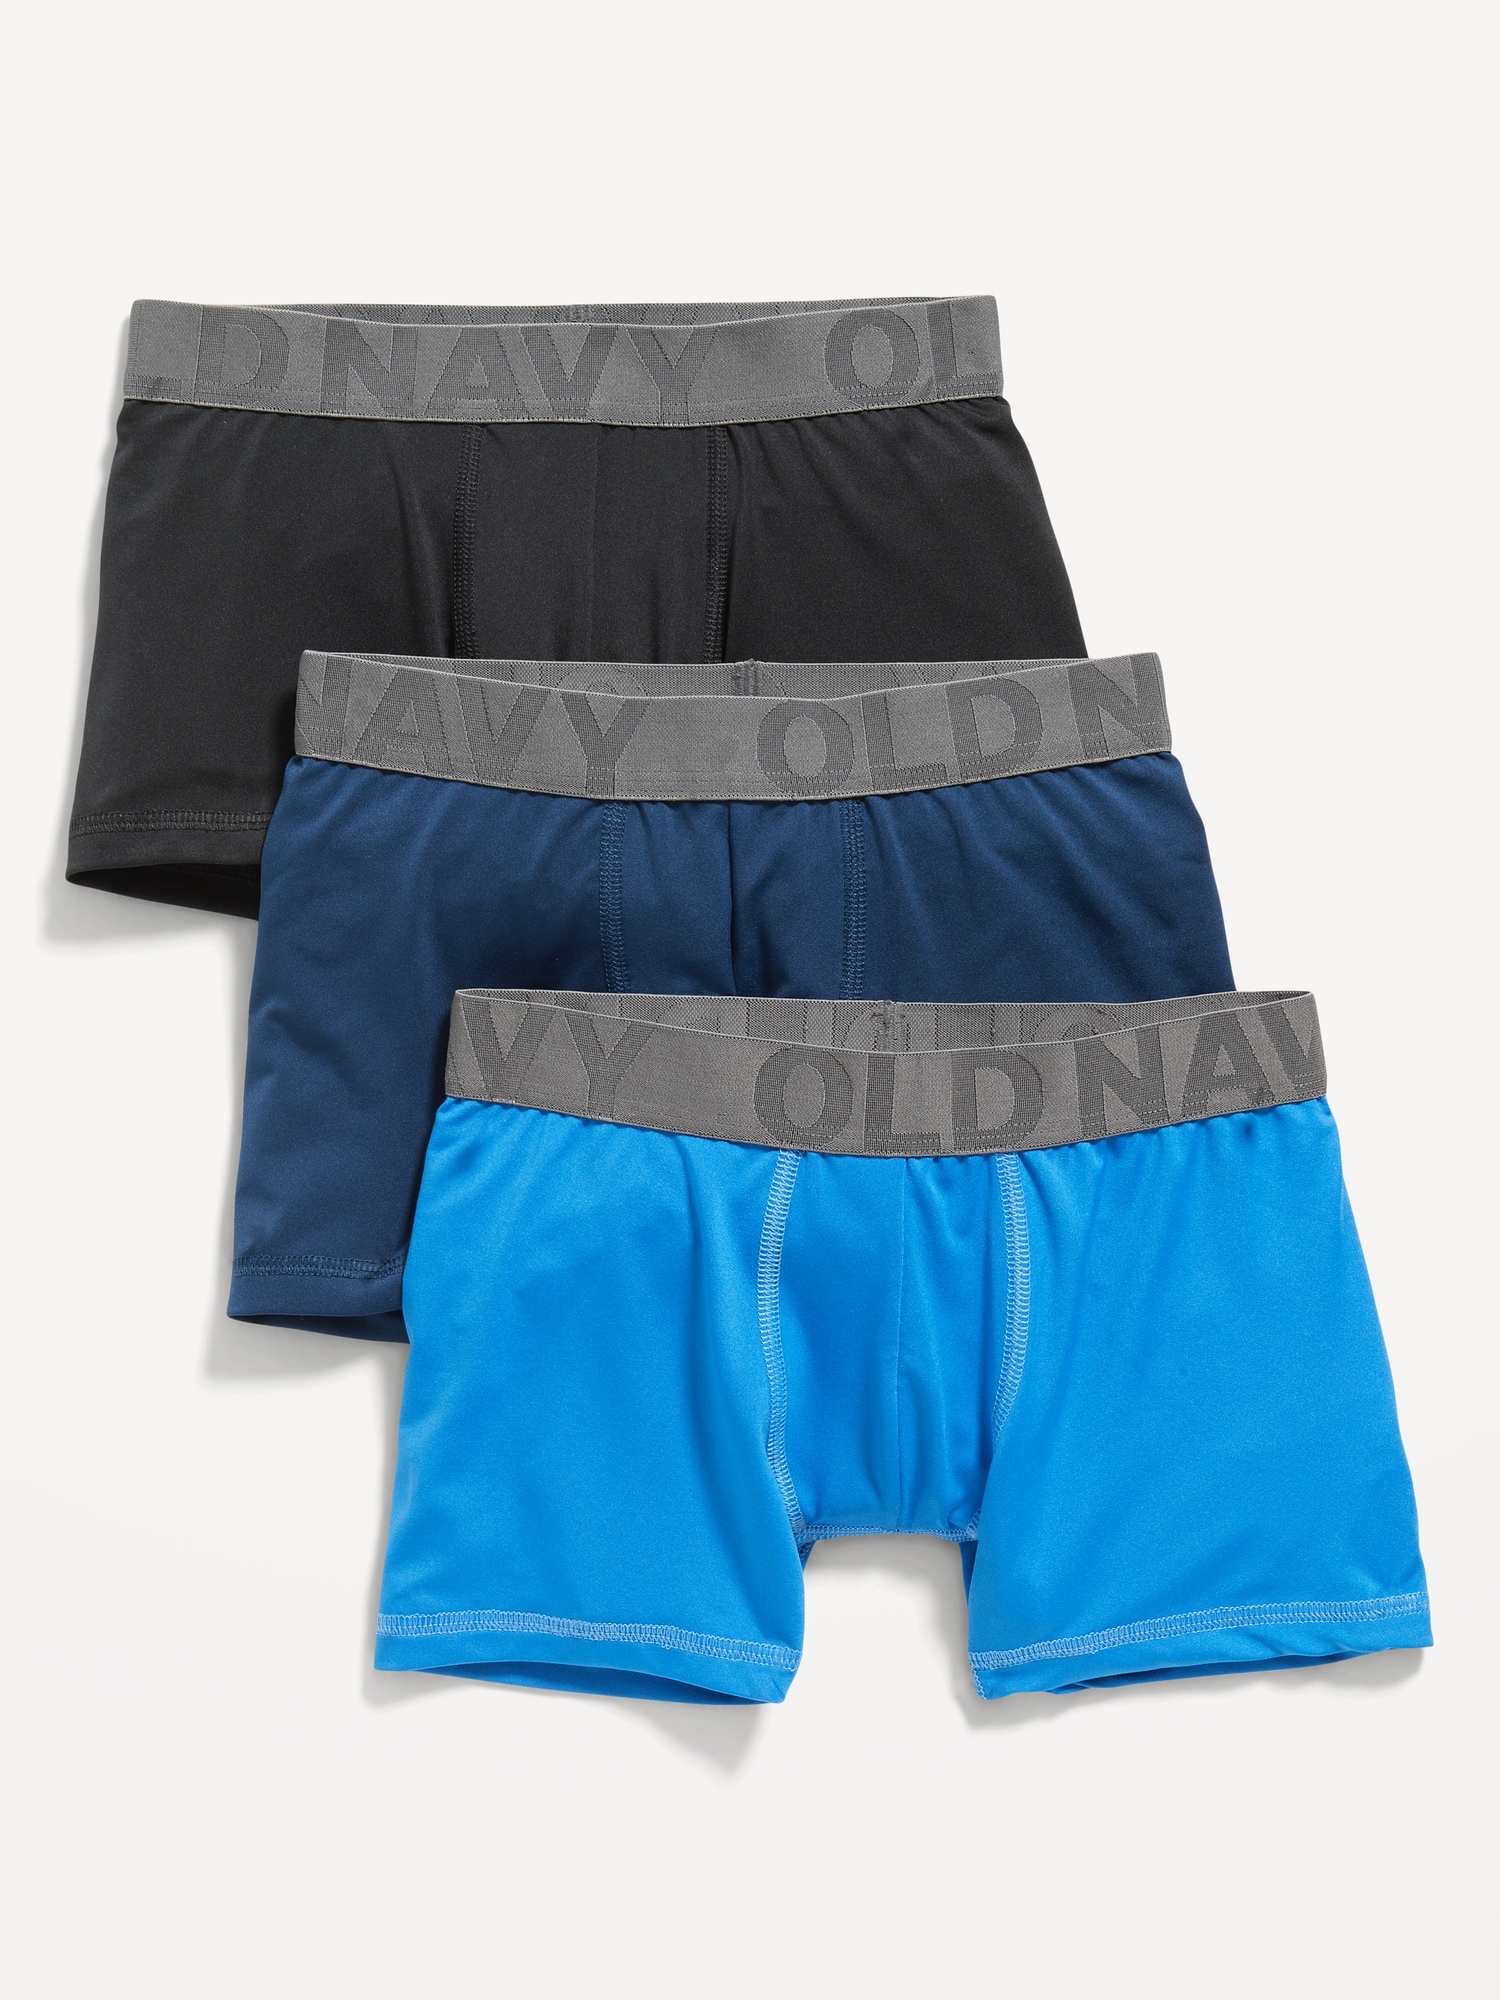 Performance Boxer-Brief Underwear 3-Pack for Boys